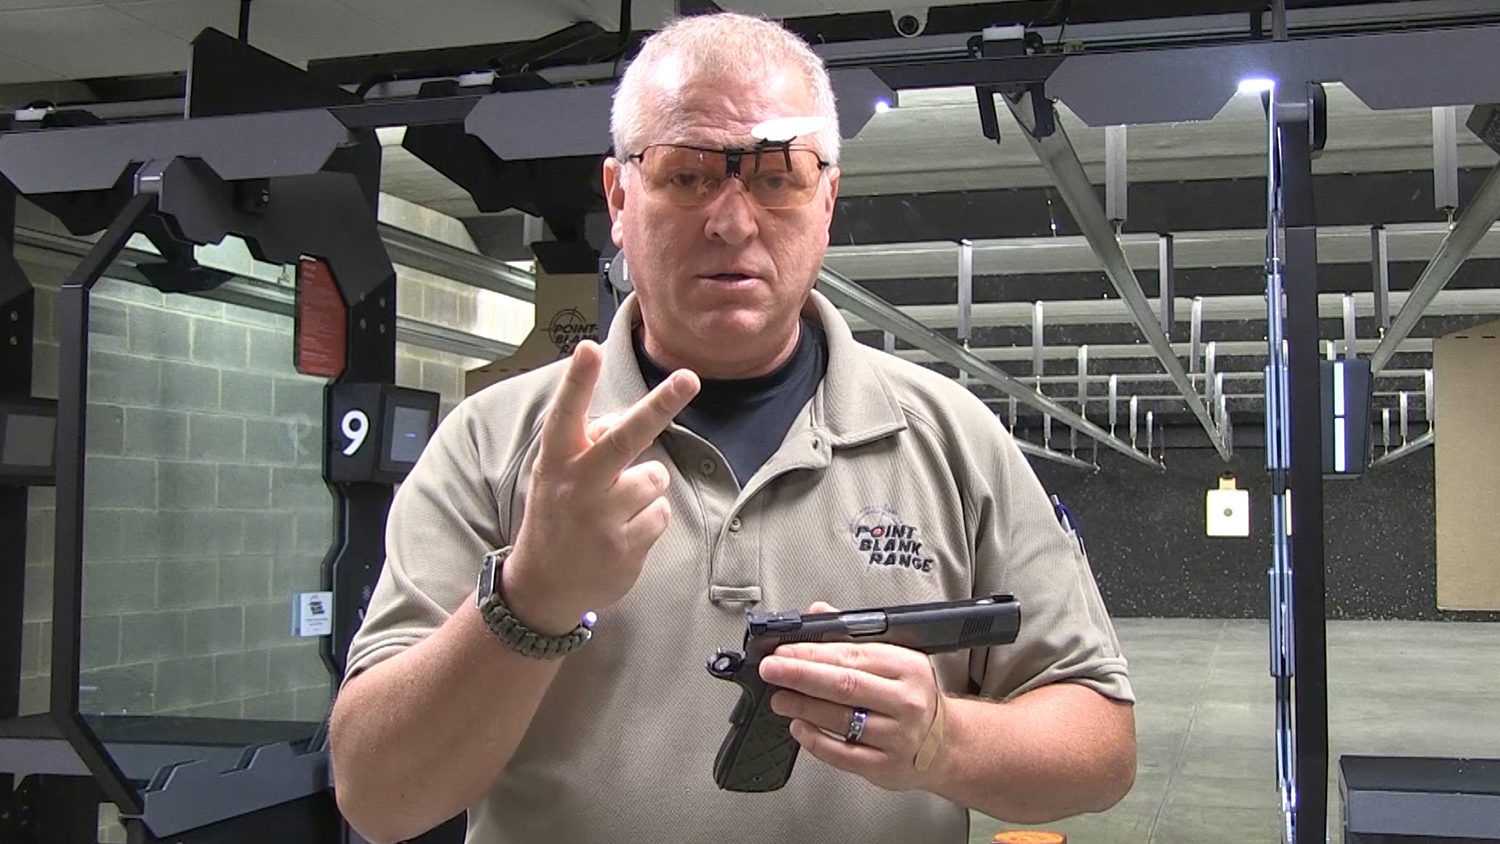 Brian Zins | The relationship between trigger control and aiming